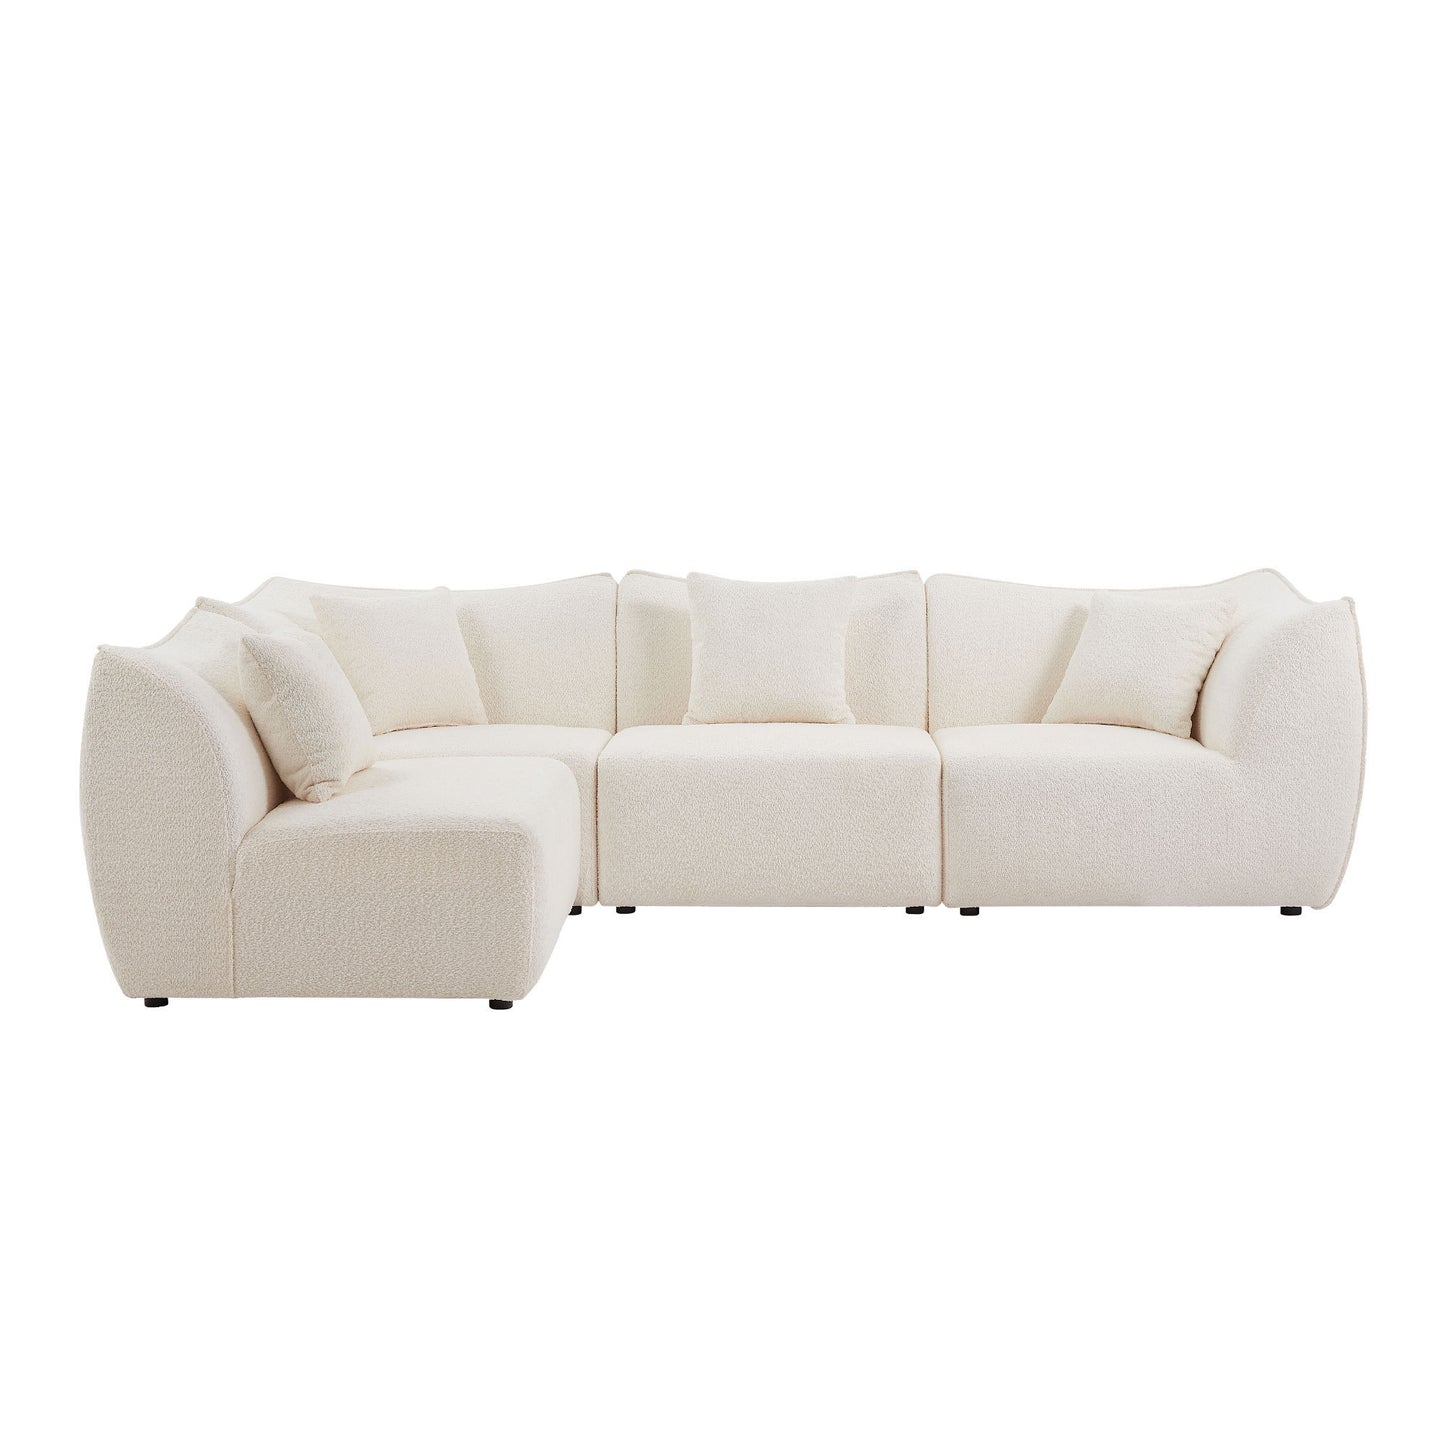 Combination Sectional Sofa Upholstery Leisure Wide Deap Seat 4 Seaters Living Room, Apartment, Office Beige.